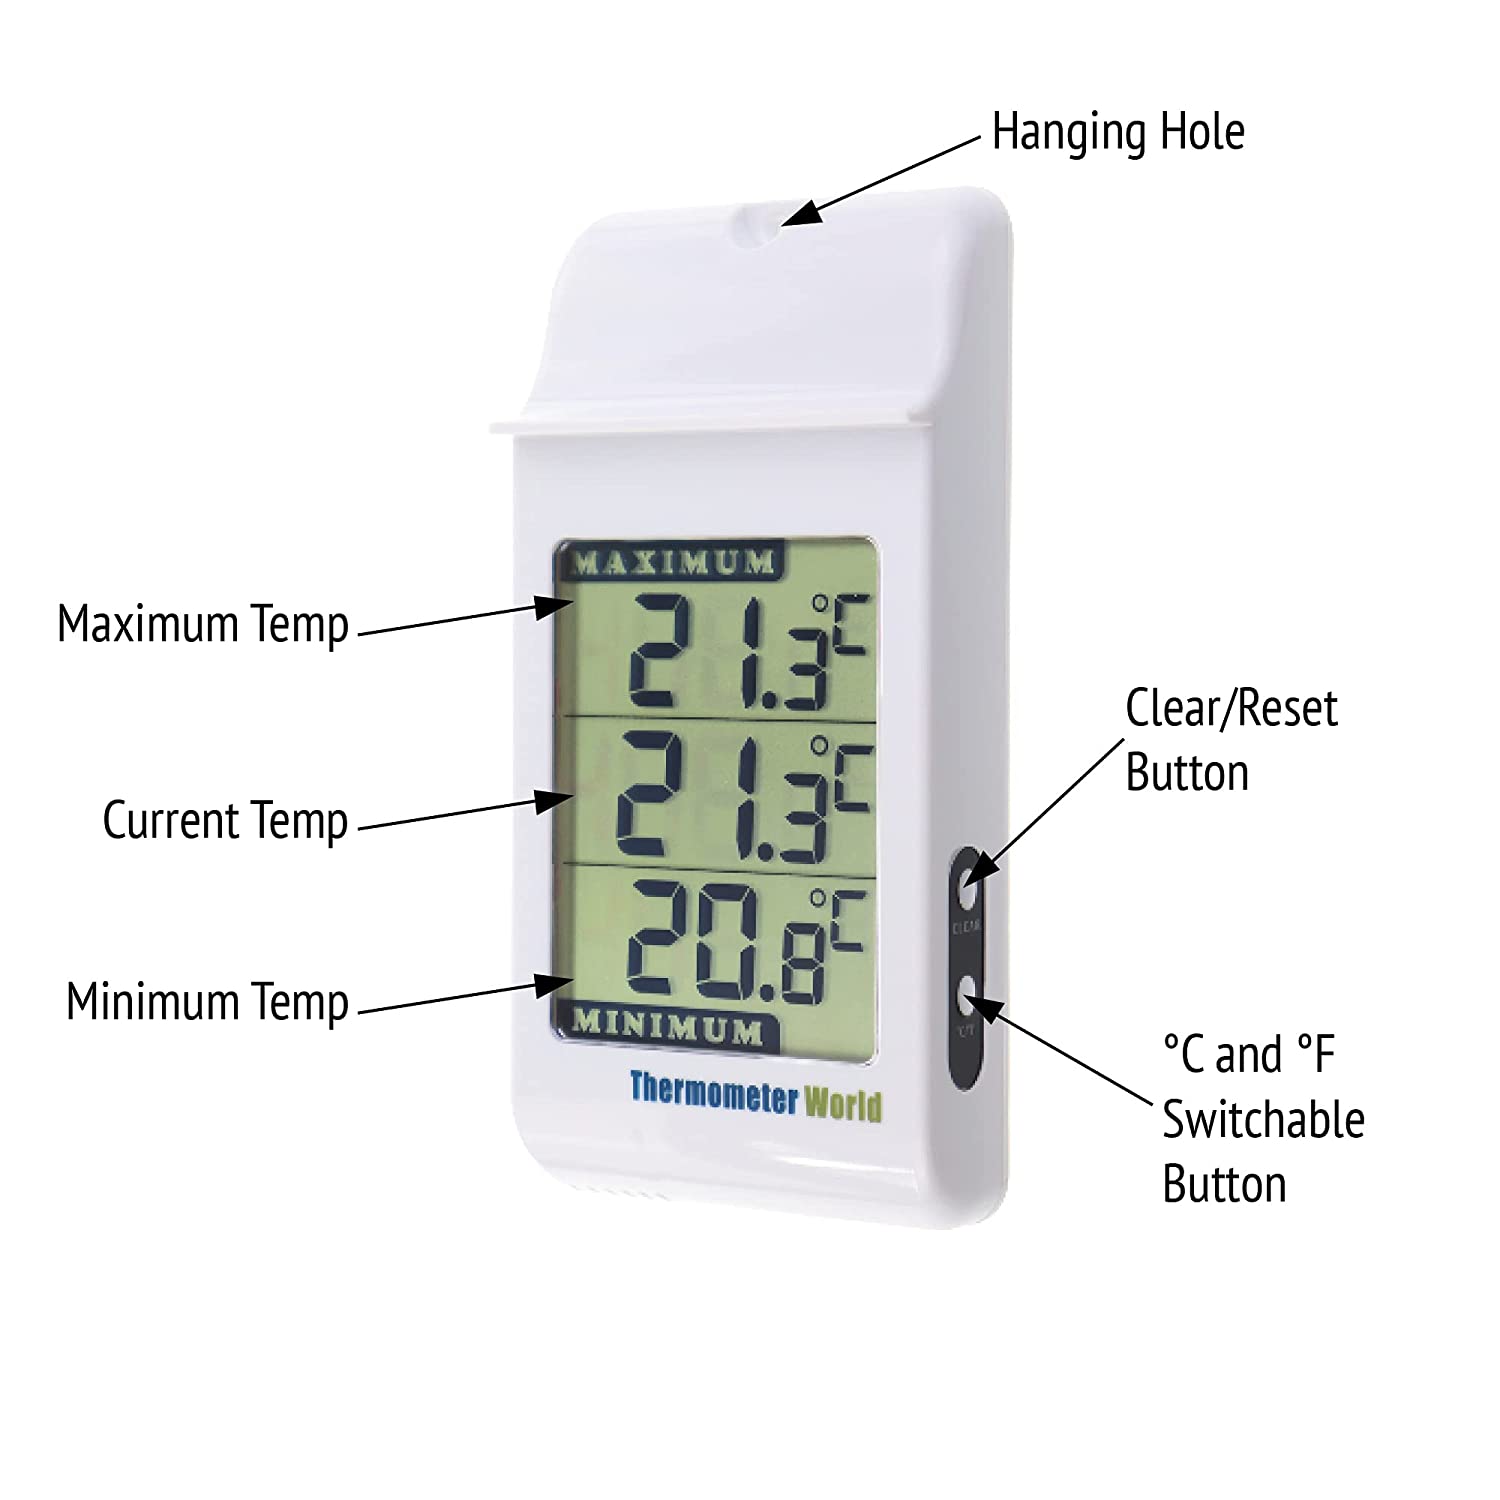 Digital Greenhouse Thermometer for Monitoring Maximum and Minimum  Temperatures - High Low Thermometer for Recording Max and Min Temperatures  Garage